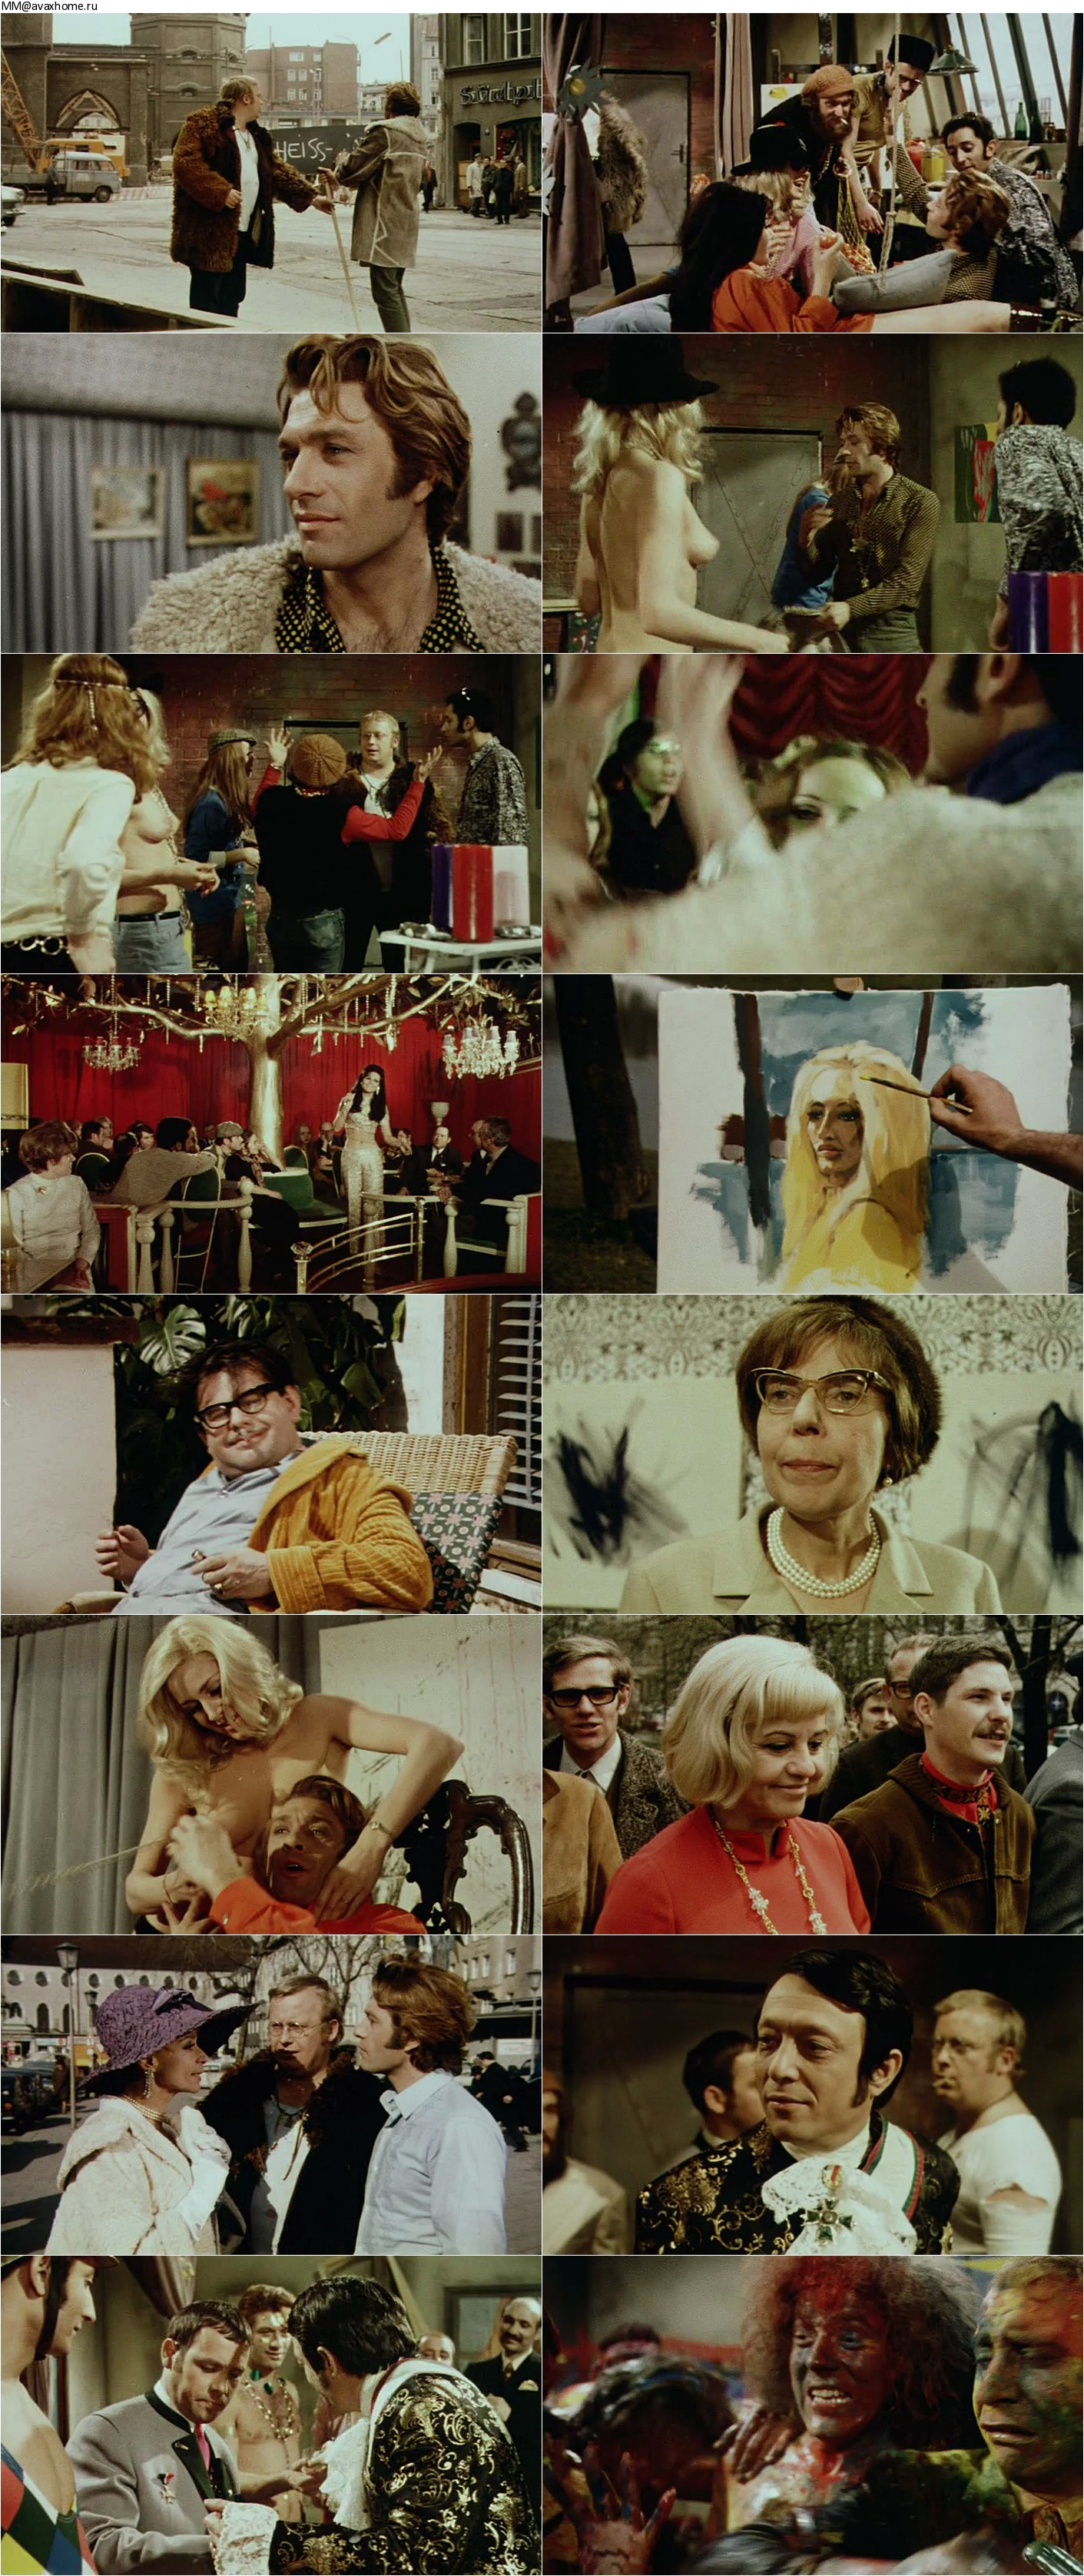 The Man with the Golden Brush (1969) L'uomo dal pennello d'oro